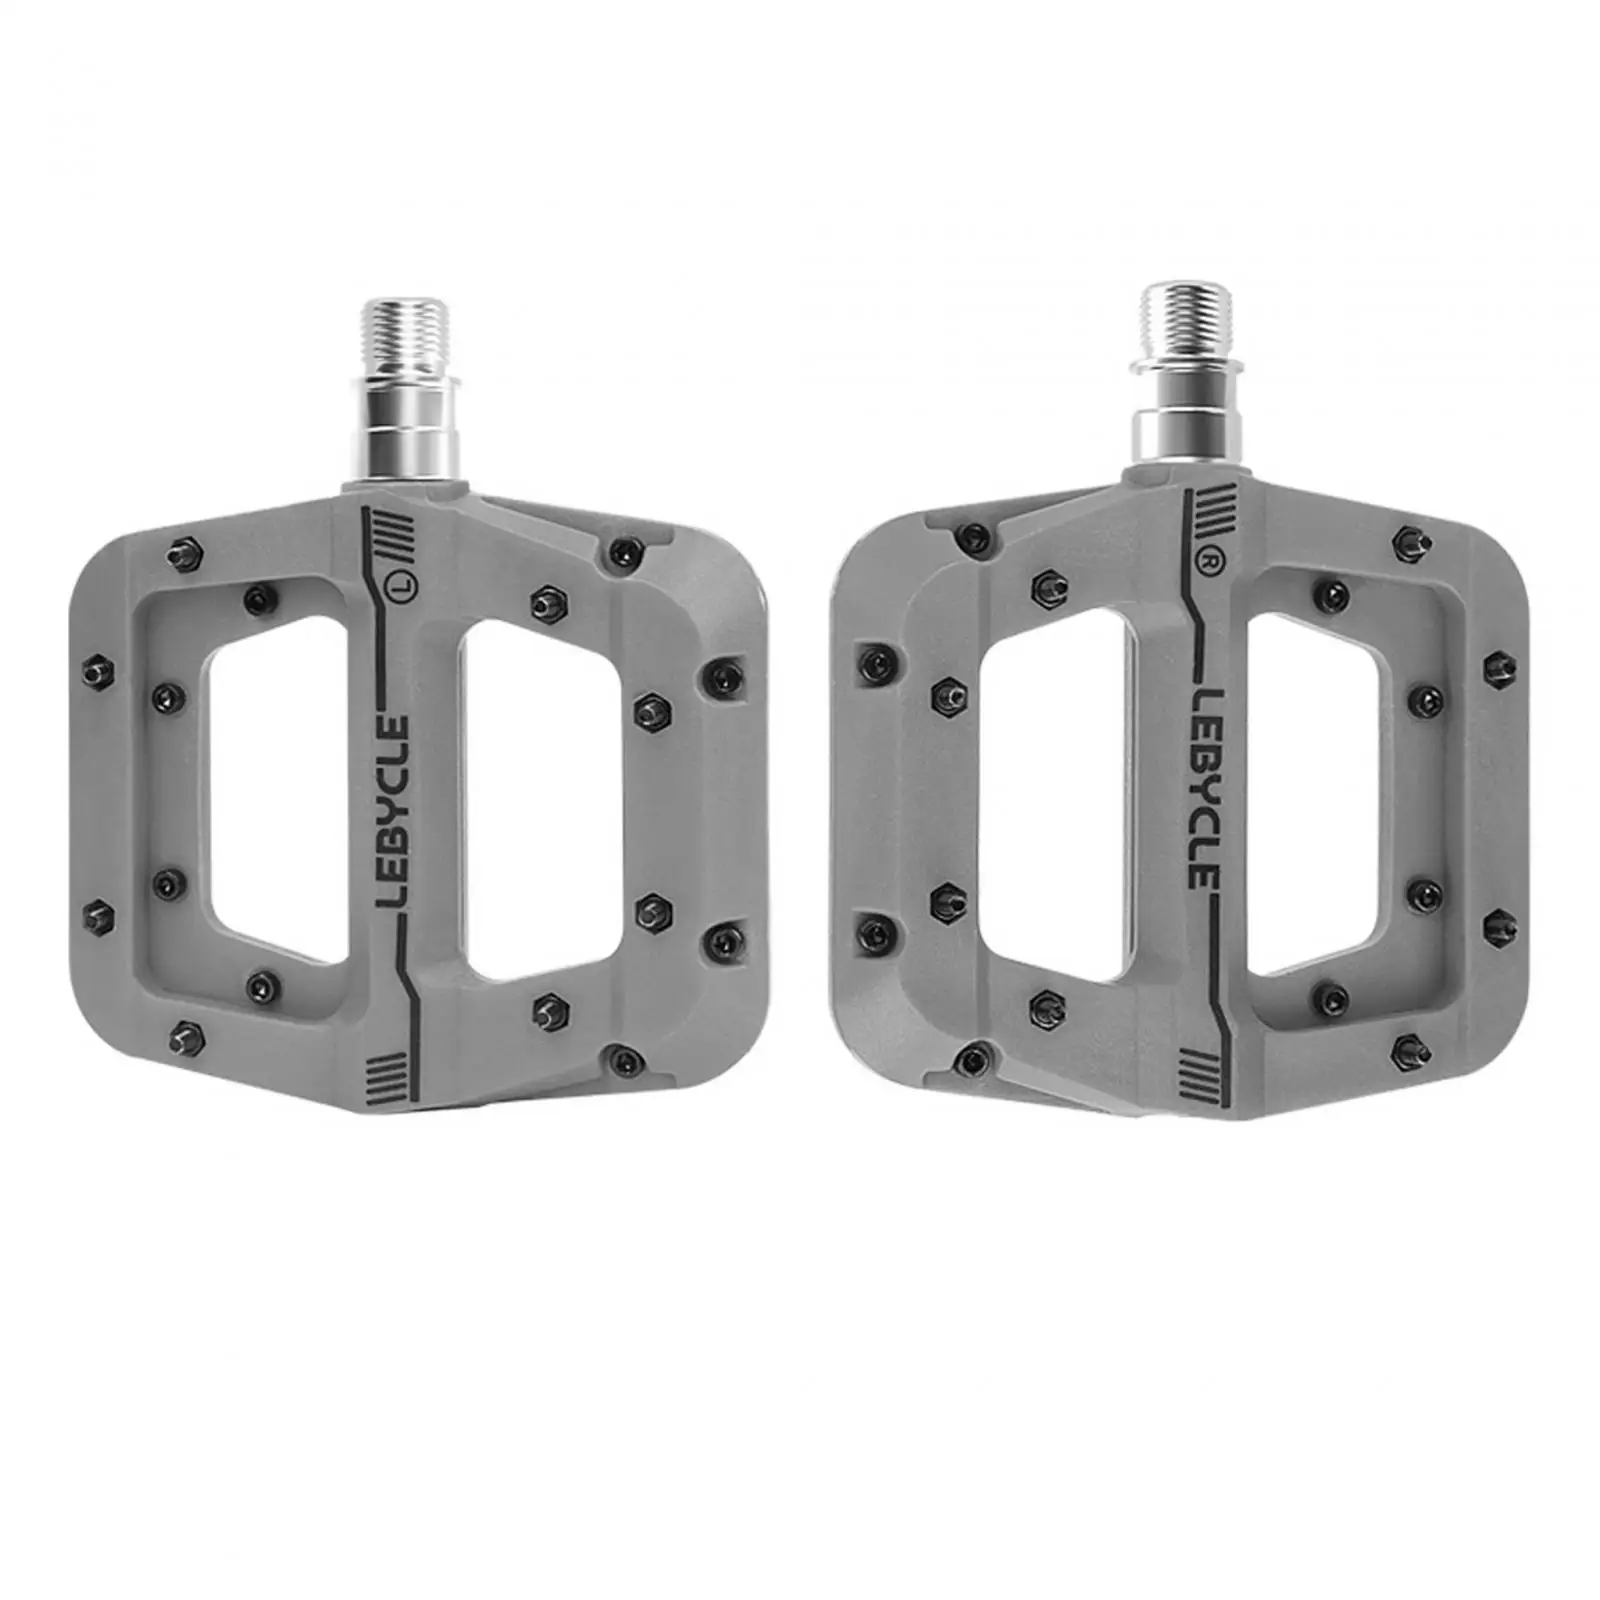 Bike Pedals Bicycle Platform Pedals for City Bikes Road Bikes Mountain Bikes